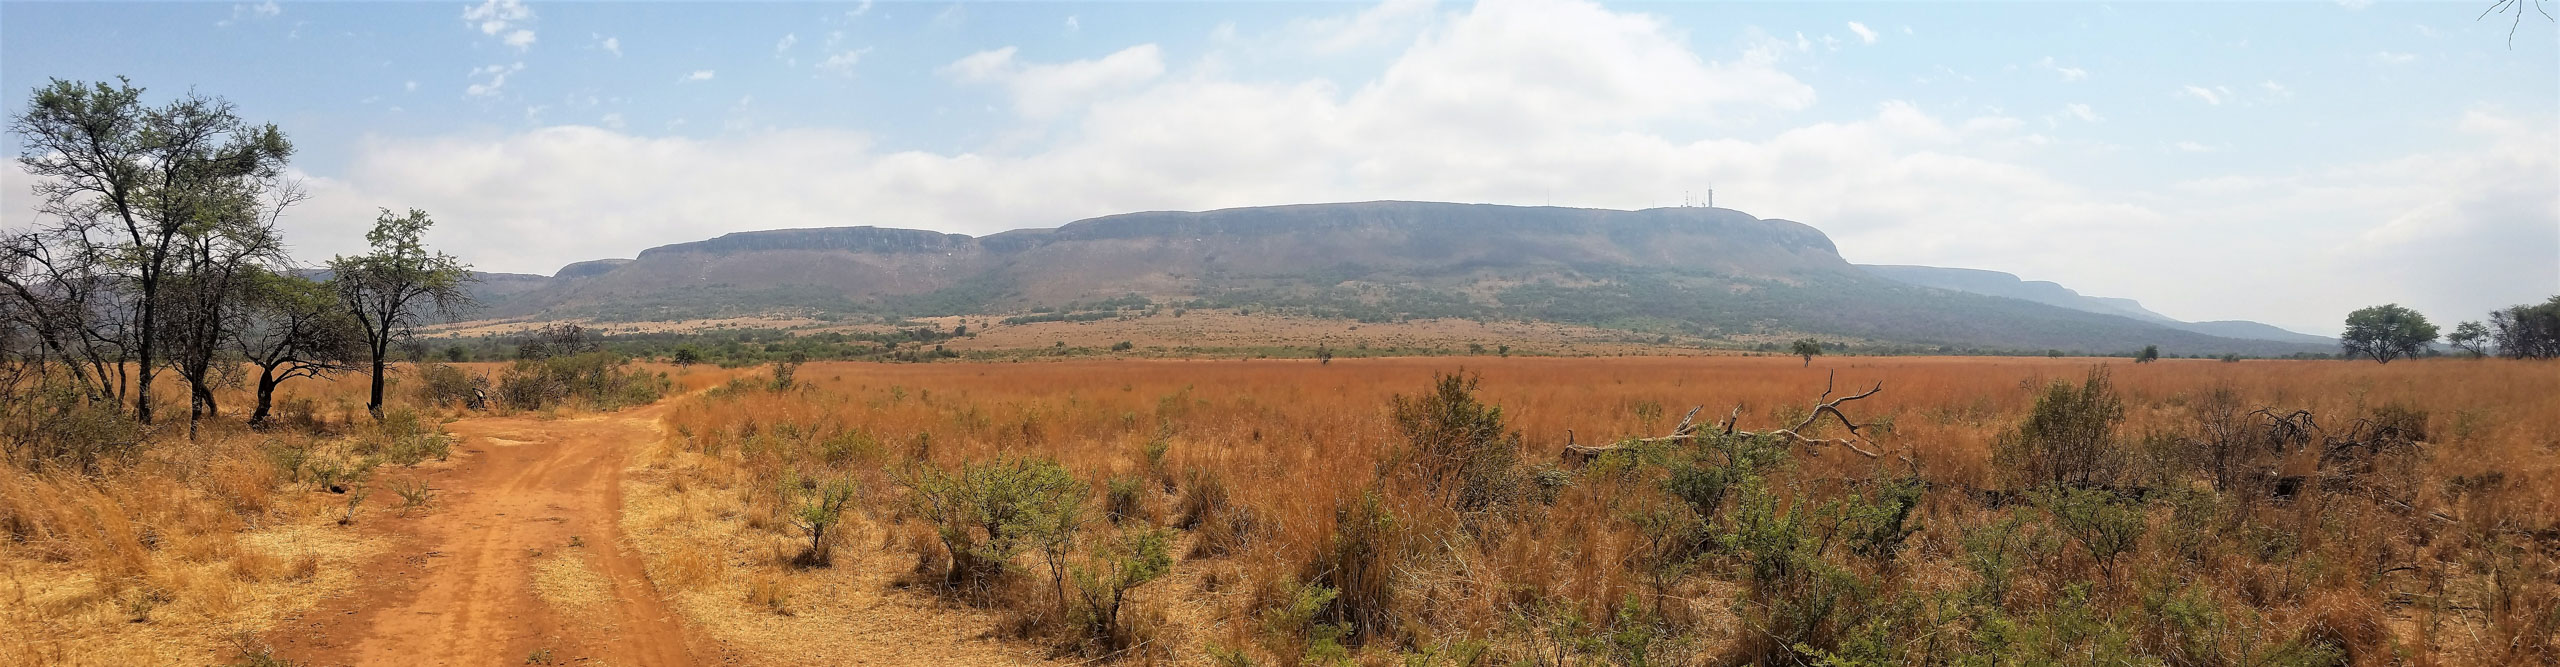 View of the savannah and mountains in the landscape near Johannesburg, South Africa